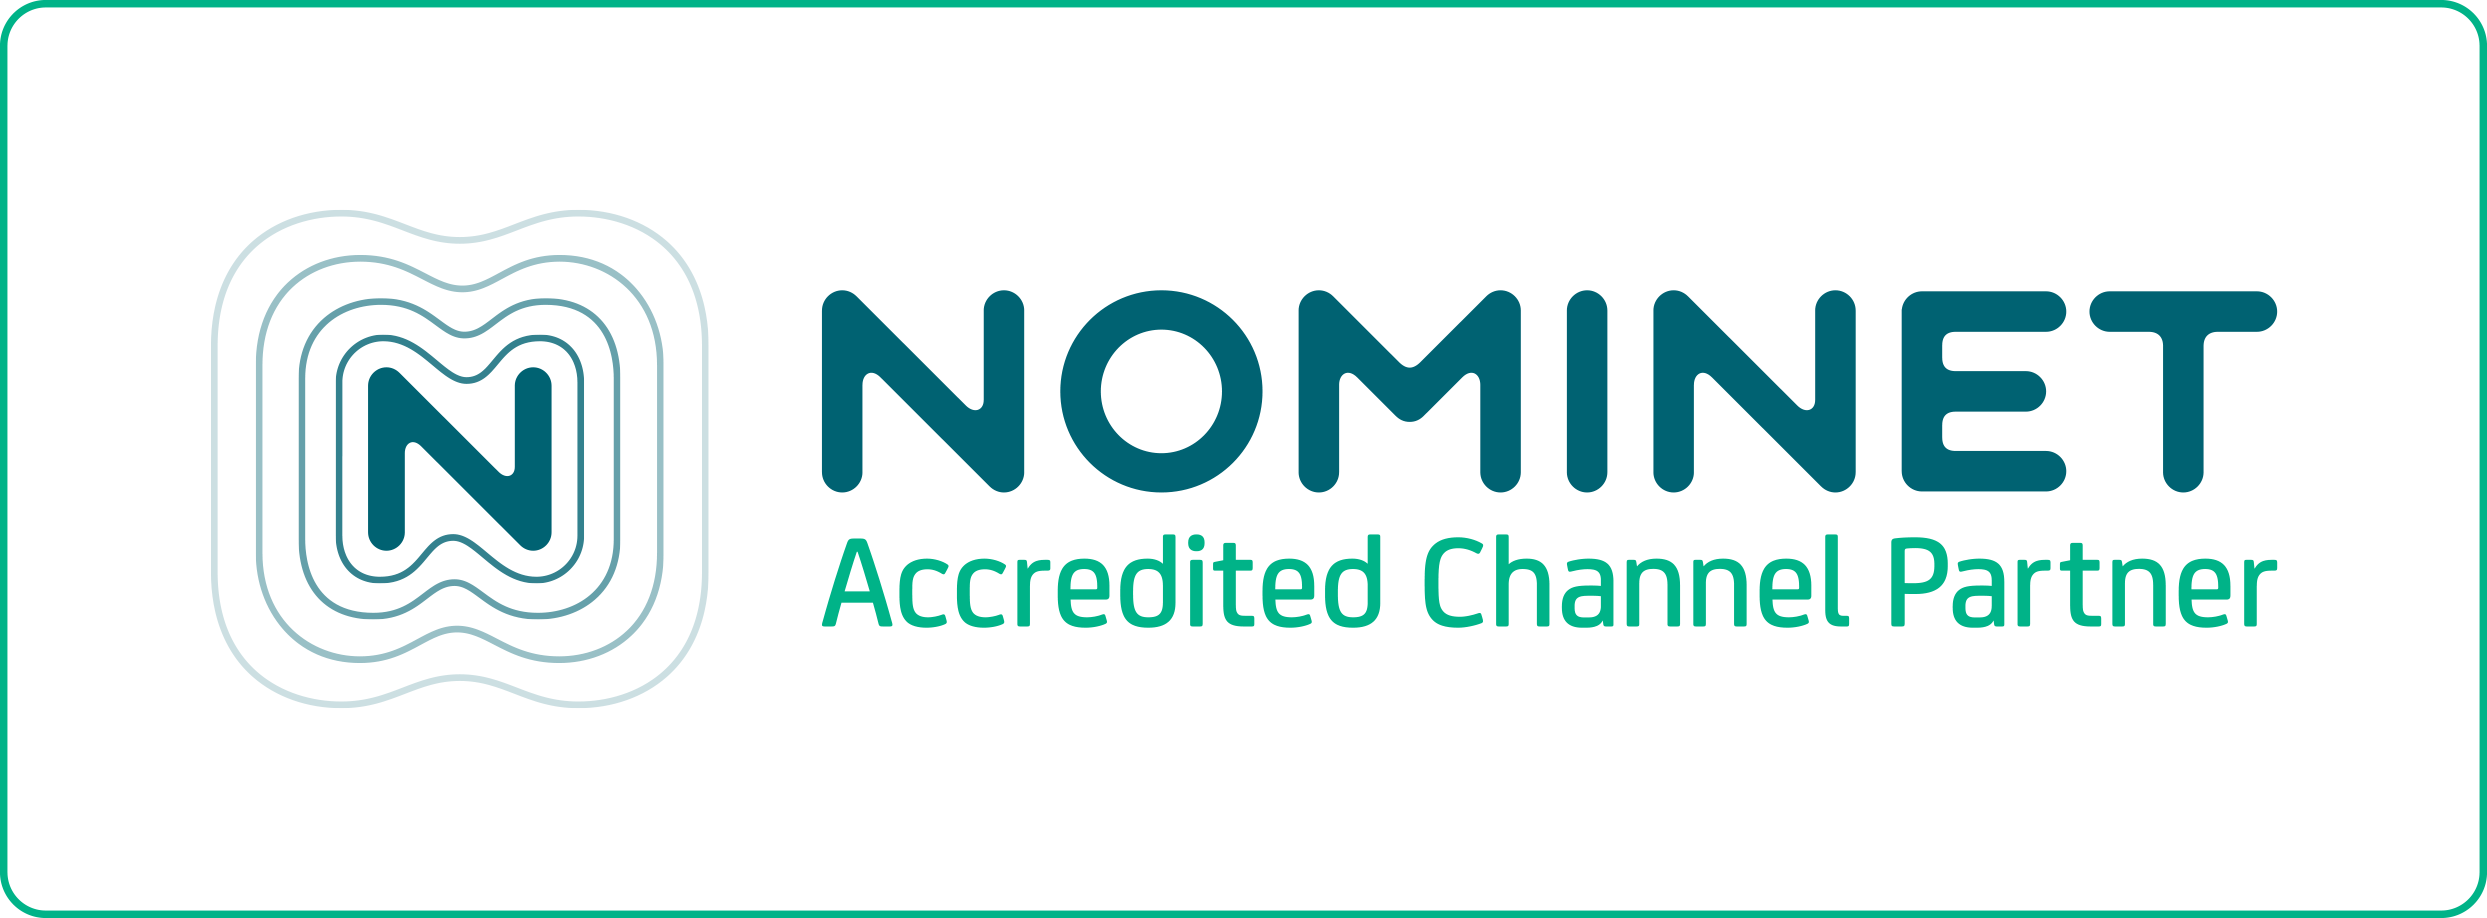 Host Media Accredited Channel Partner of Nominet